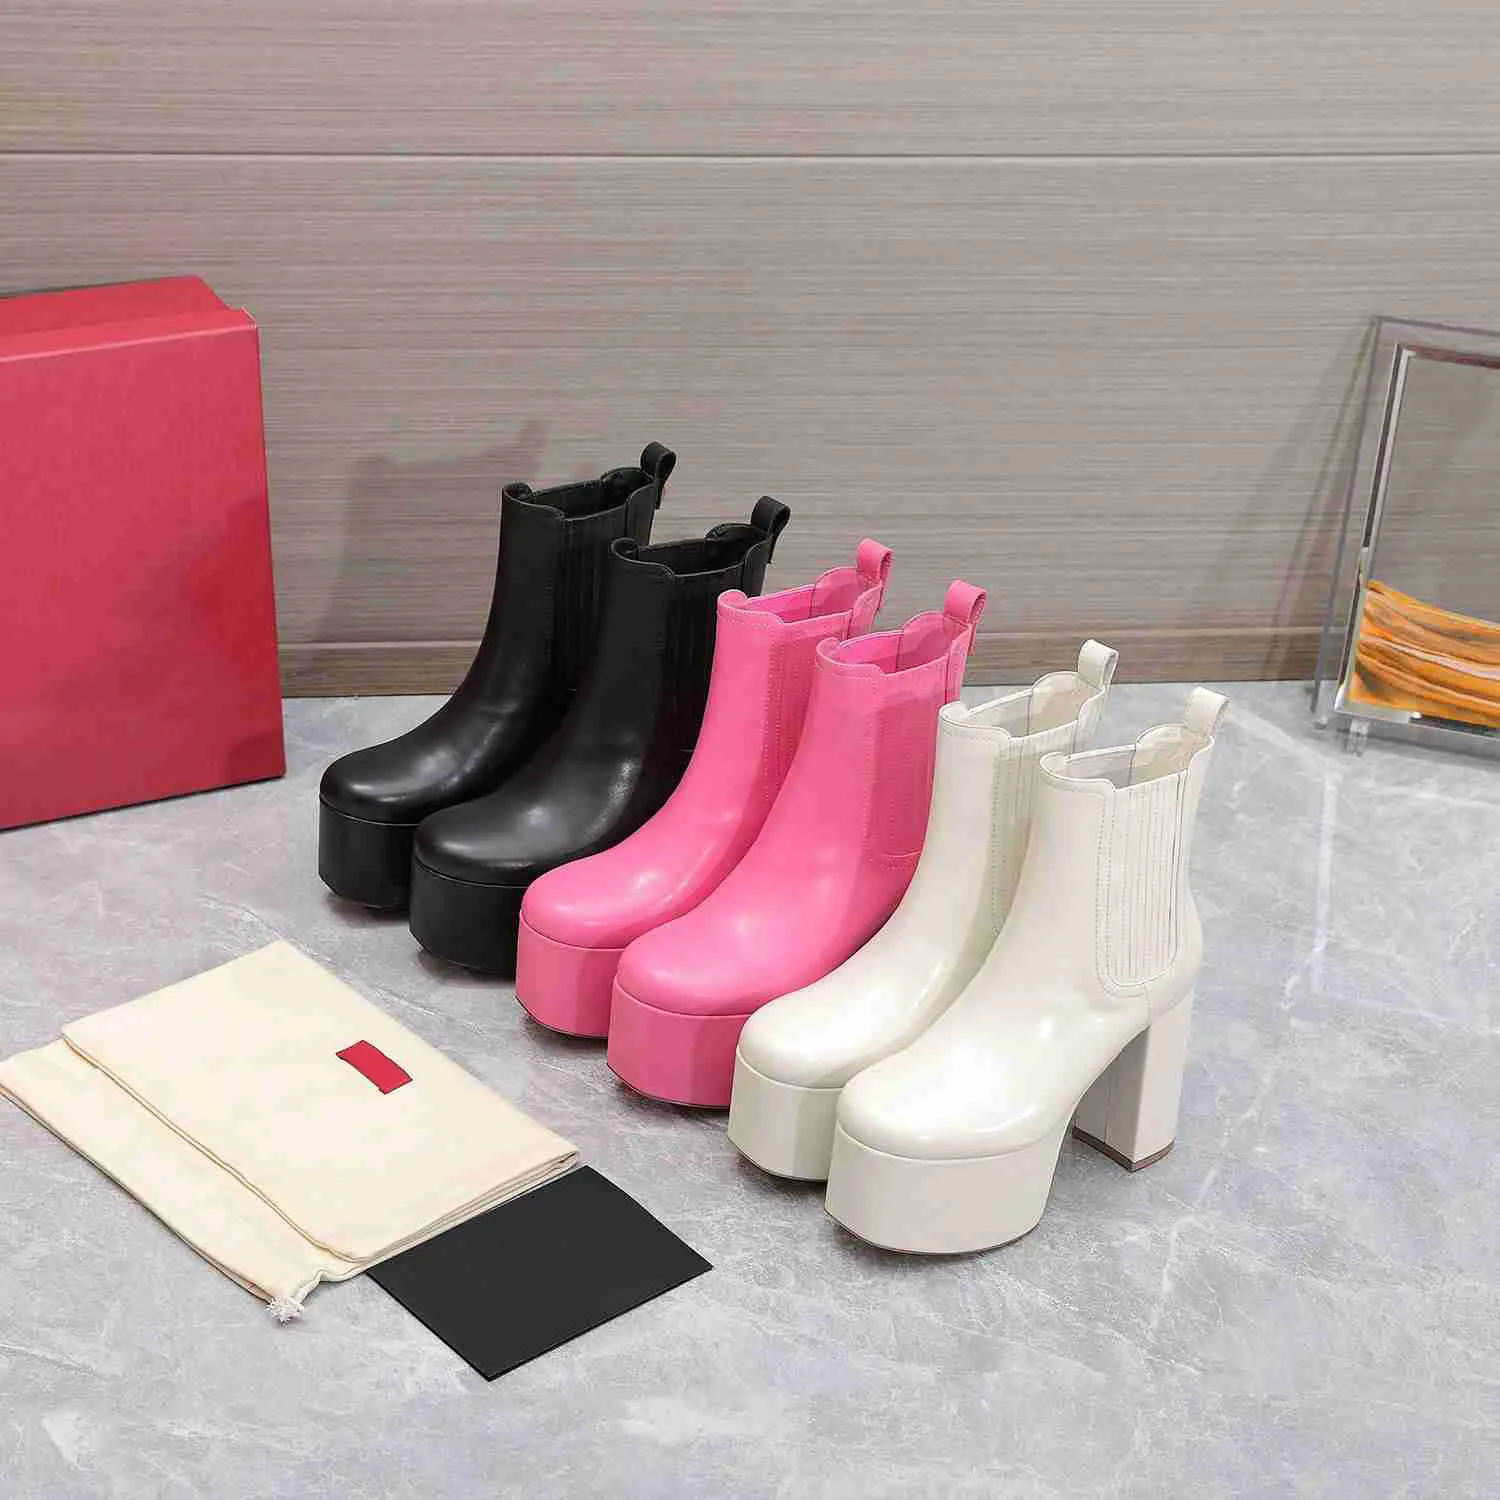 Famous designers highly recommend the round-toe platform elasticated heeled boots for the perfect presentation of top-level craftsmanship size35-41